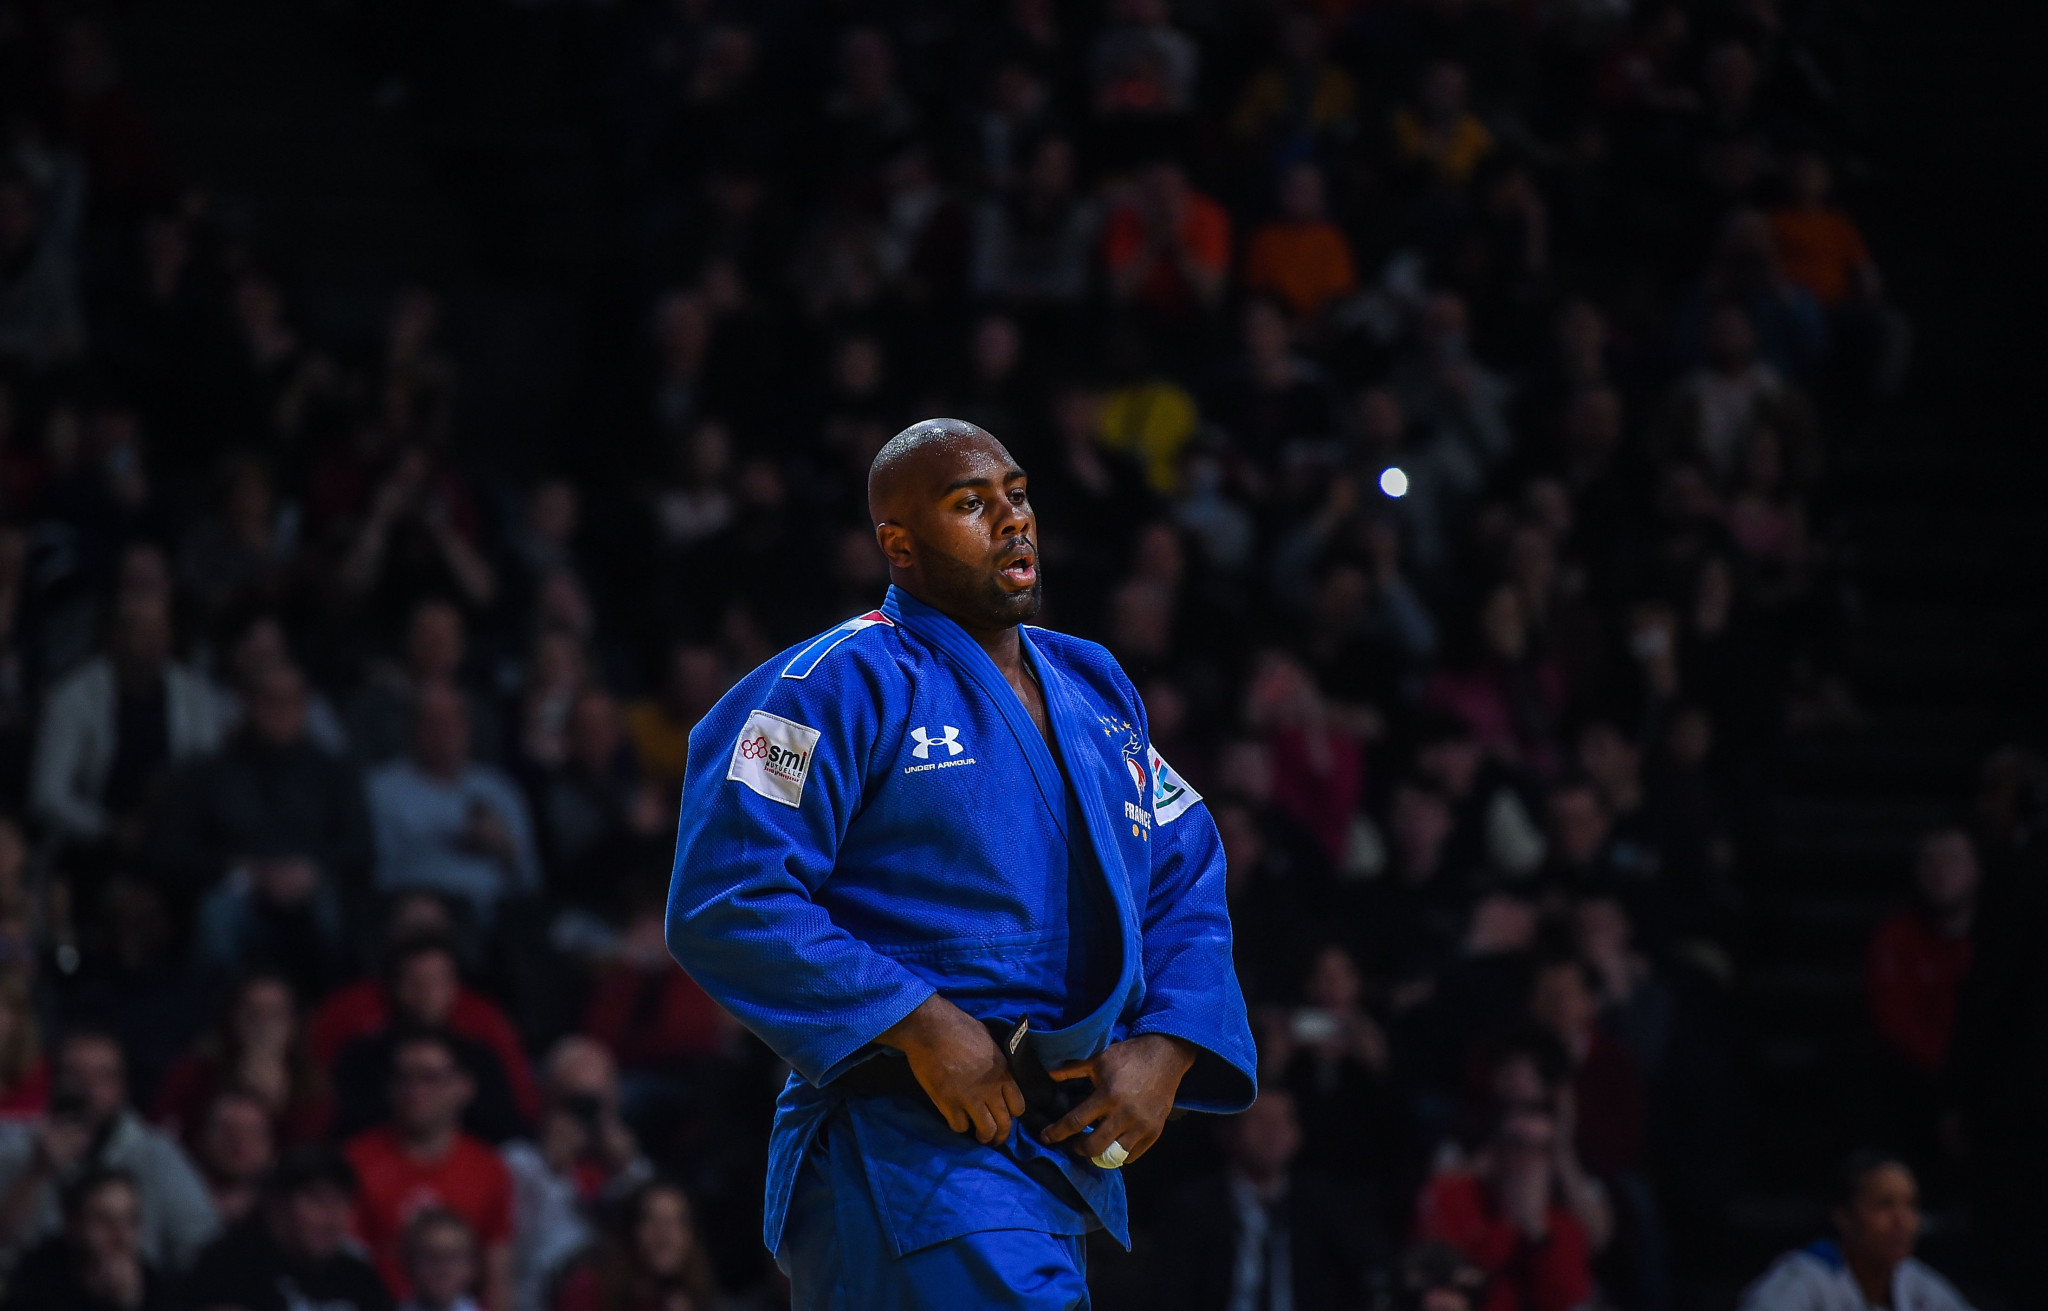 The Paris Grand Slam, where Teddy Riner suffered a surprise defeat, was one of the last IJF events held before the pandemic brought competition to a halt ©Getty Images